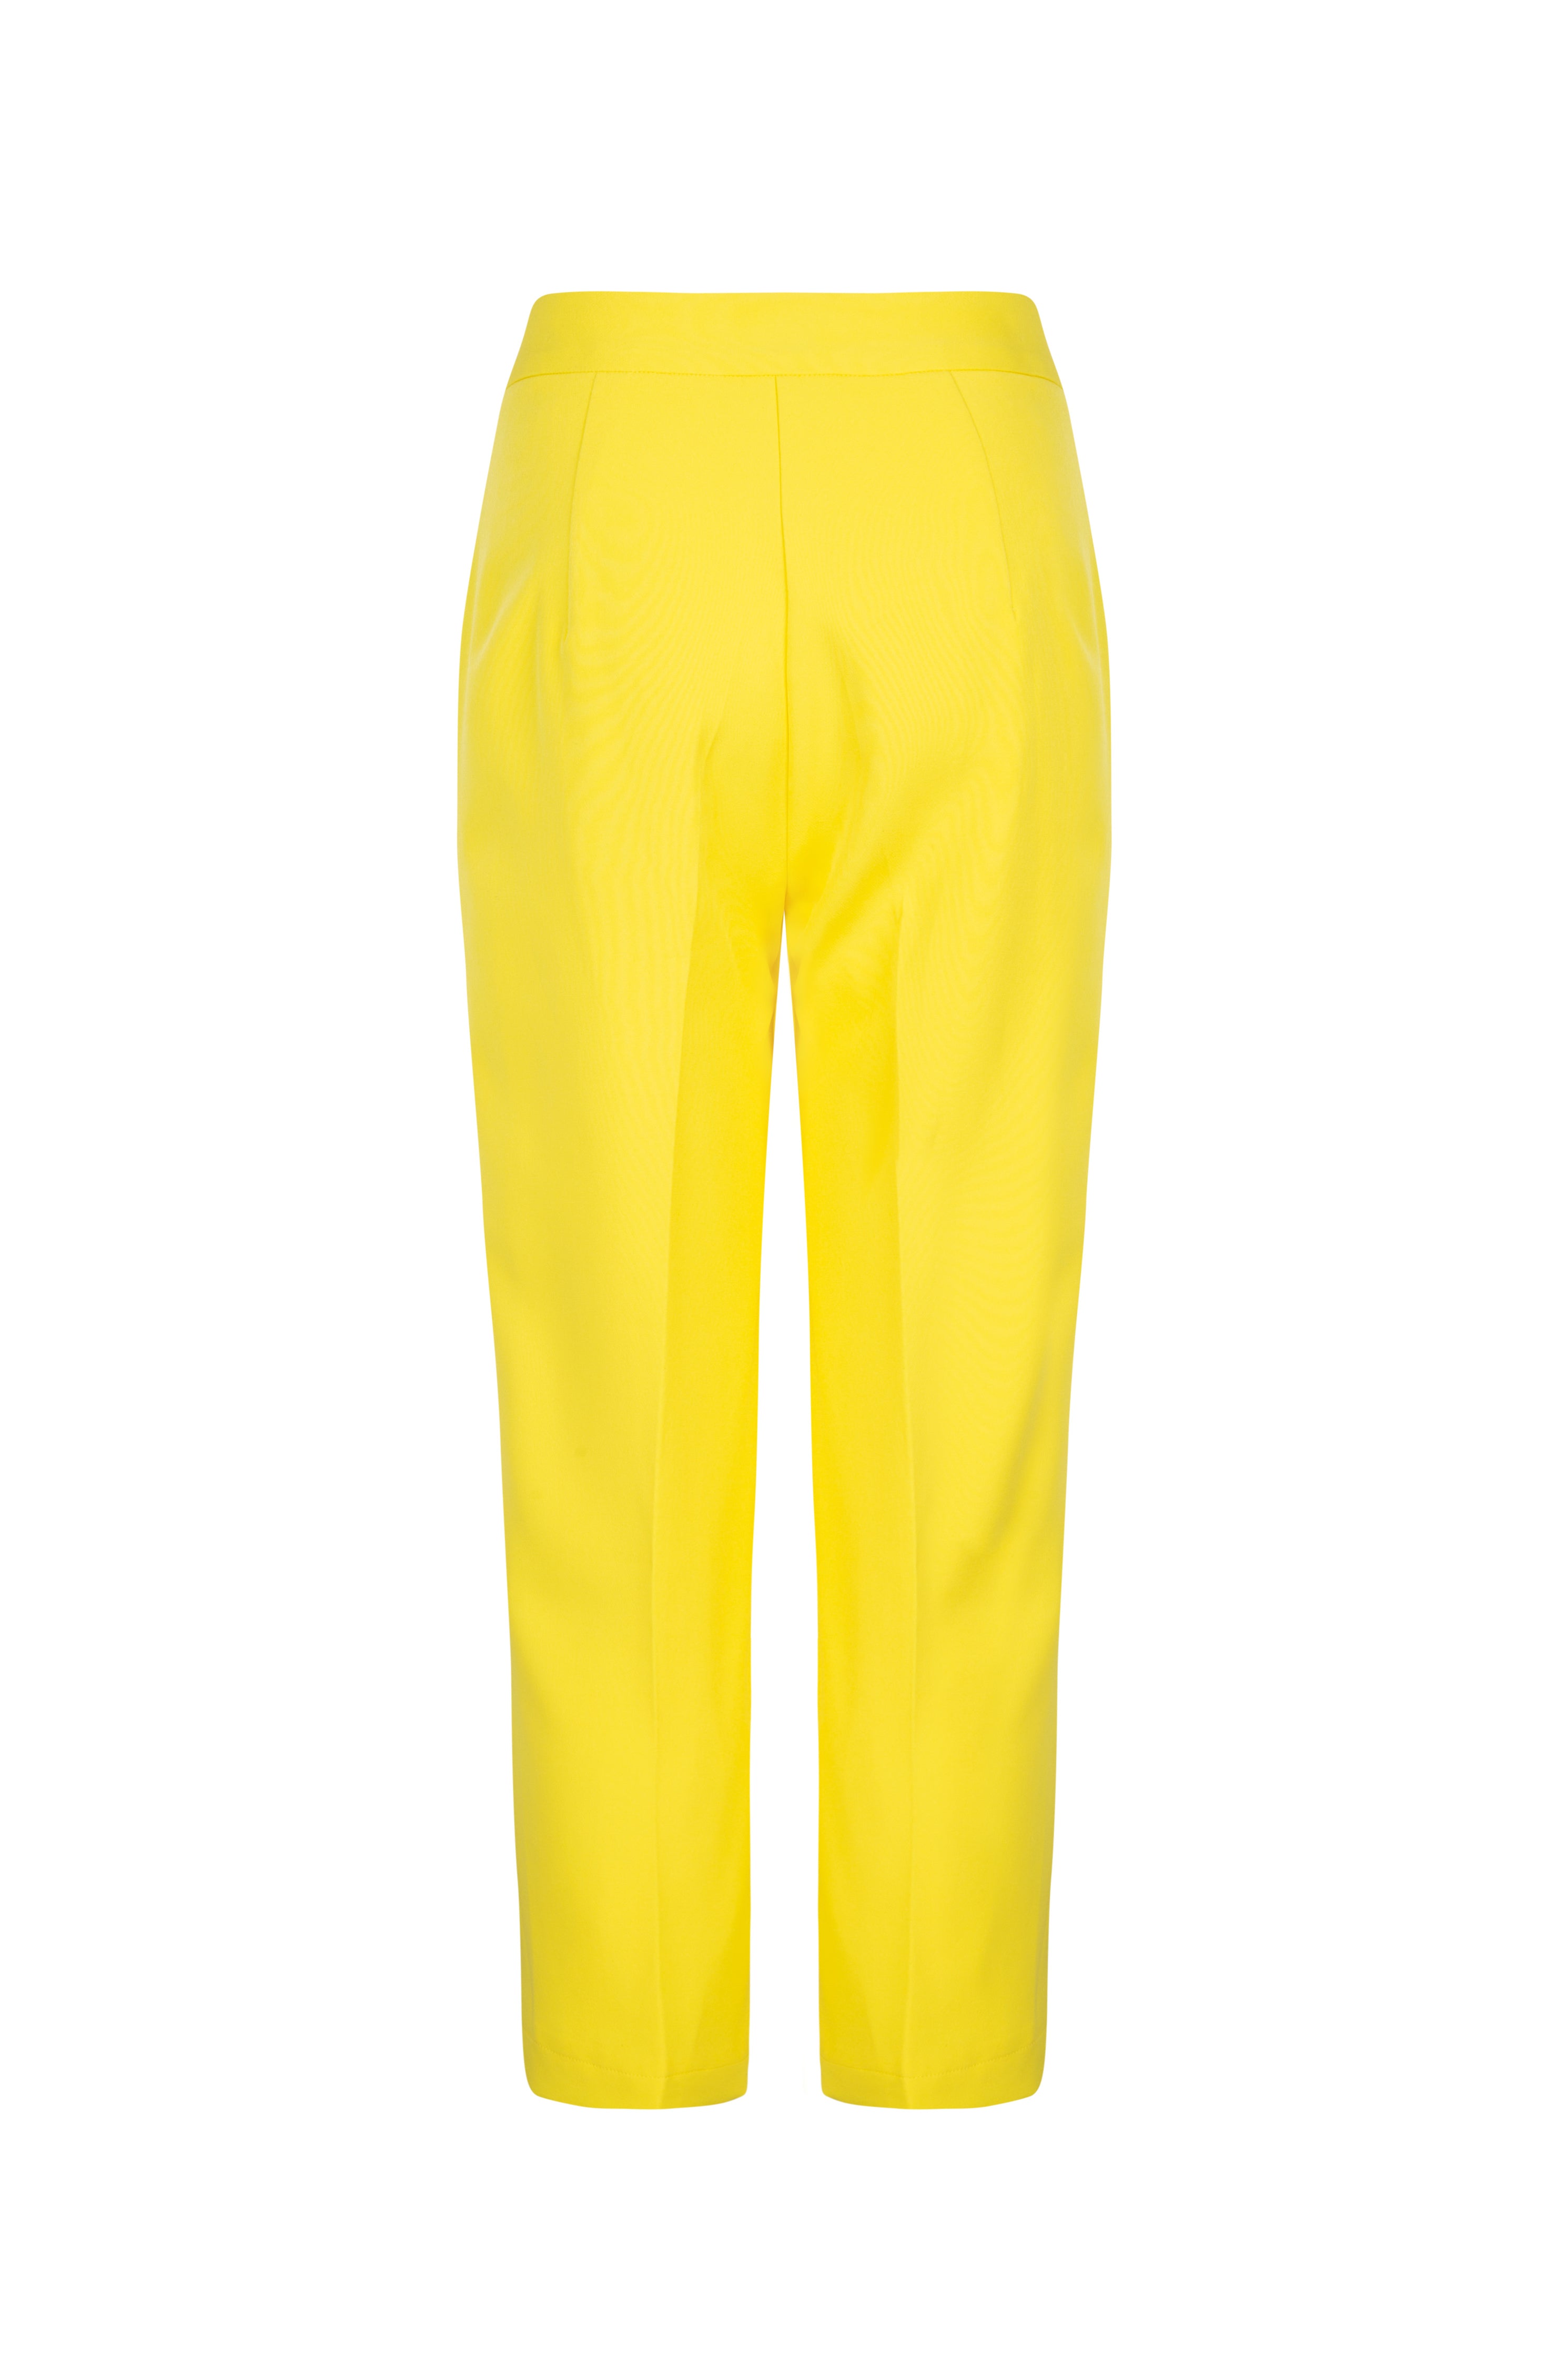 Back view of cropped yellow summer trouser